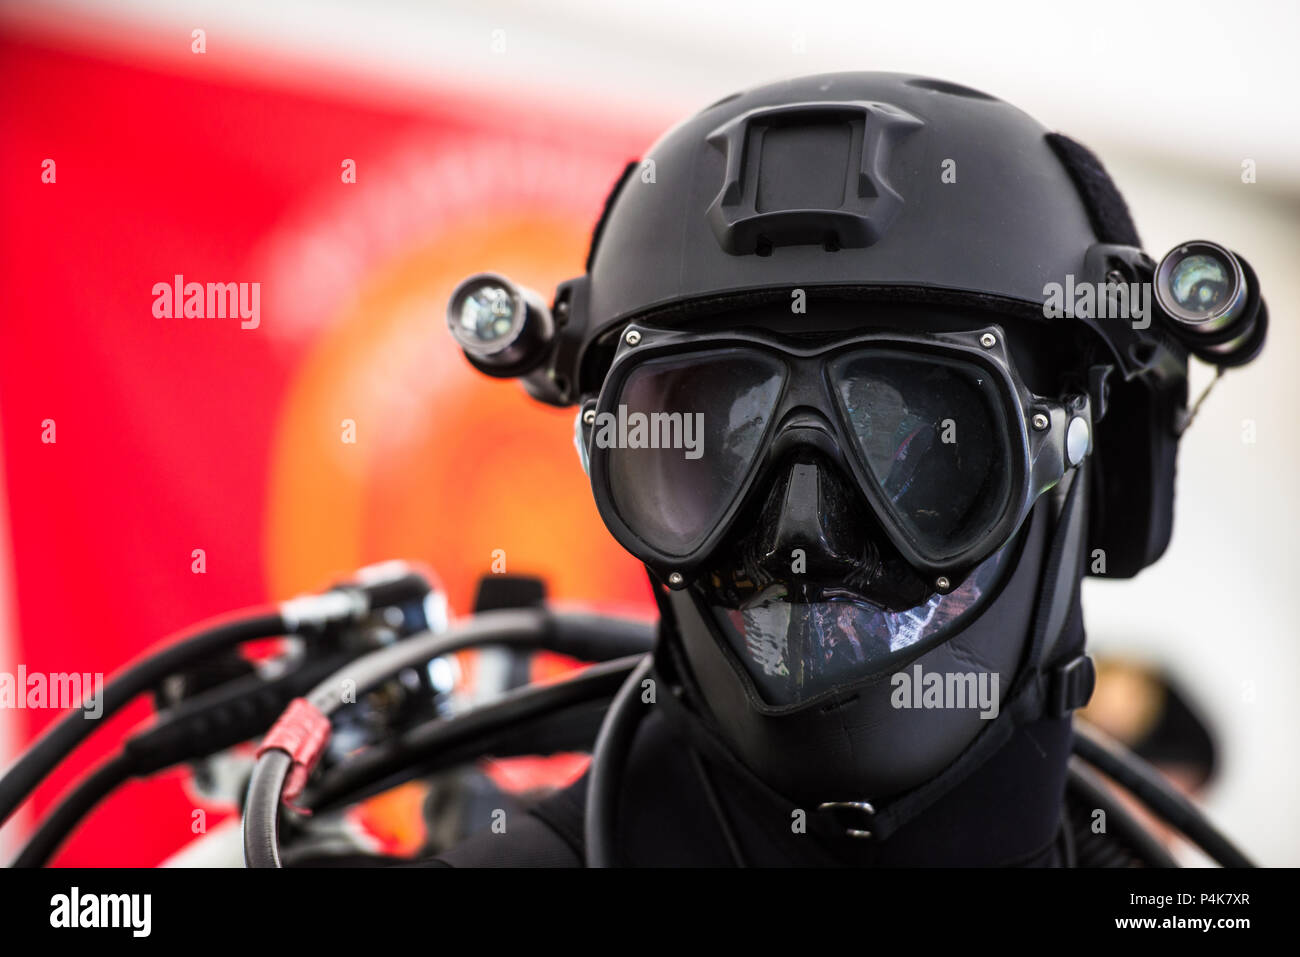 Tactical diving helmet of combat diving suit for police and army diving missions Stock Photo